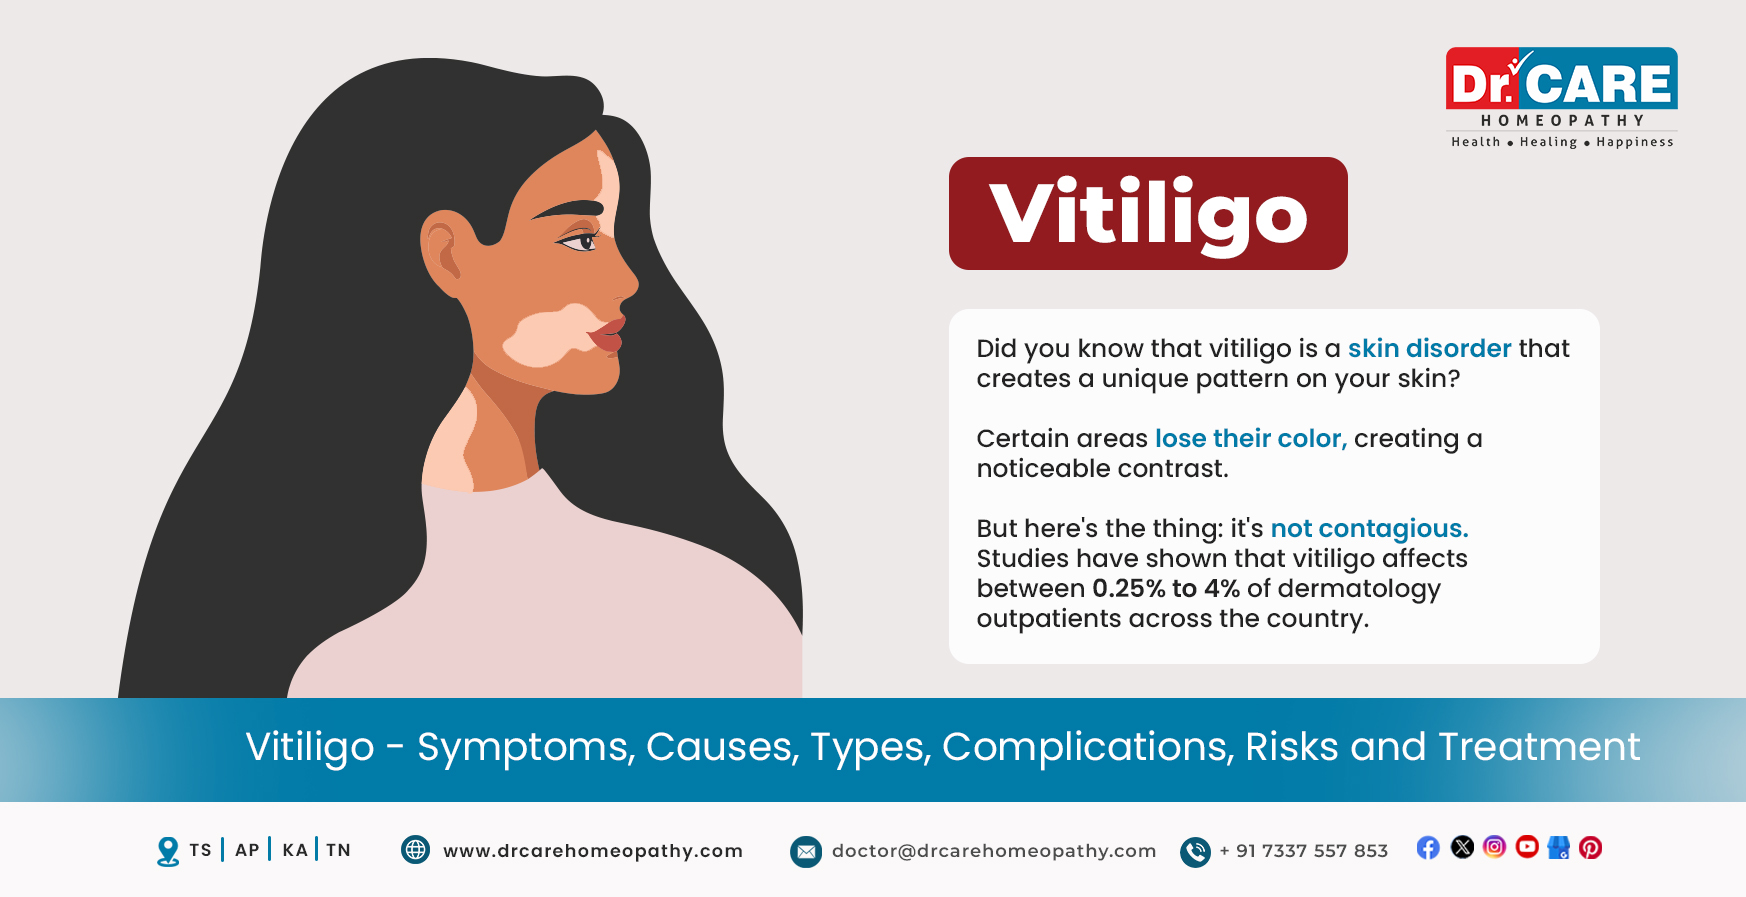 Vitiligo: Signs, Symptoms, Causes, Types, Complications Prevention And Treatment